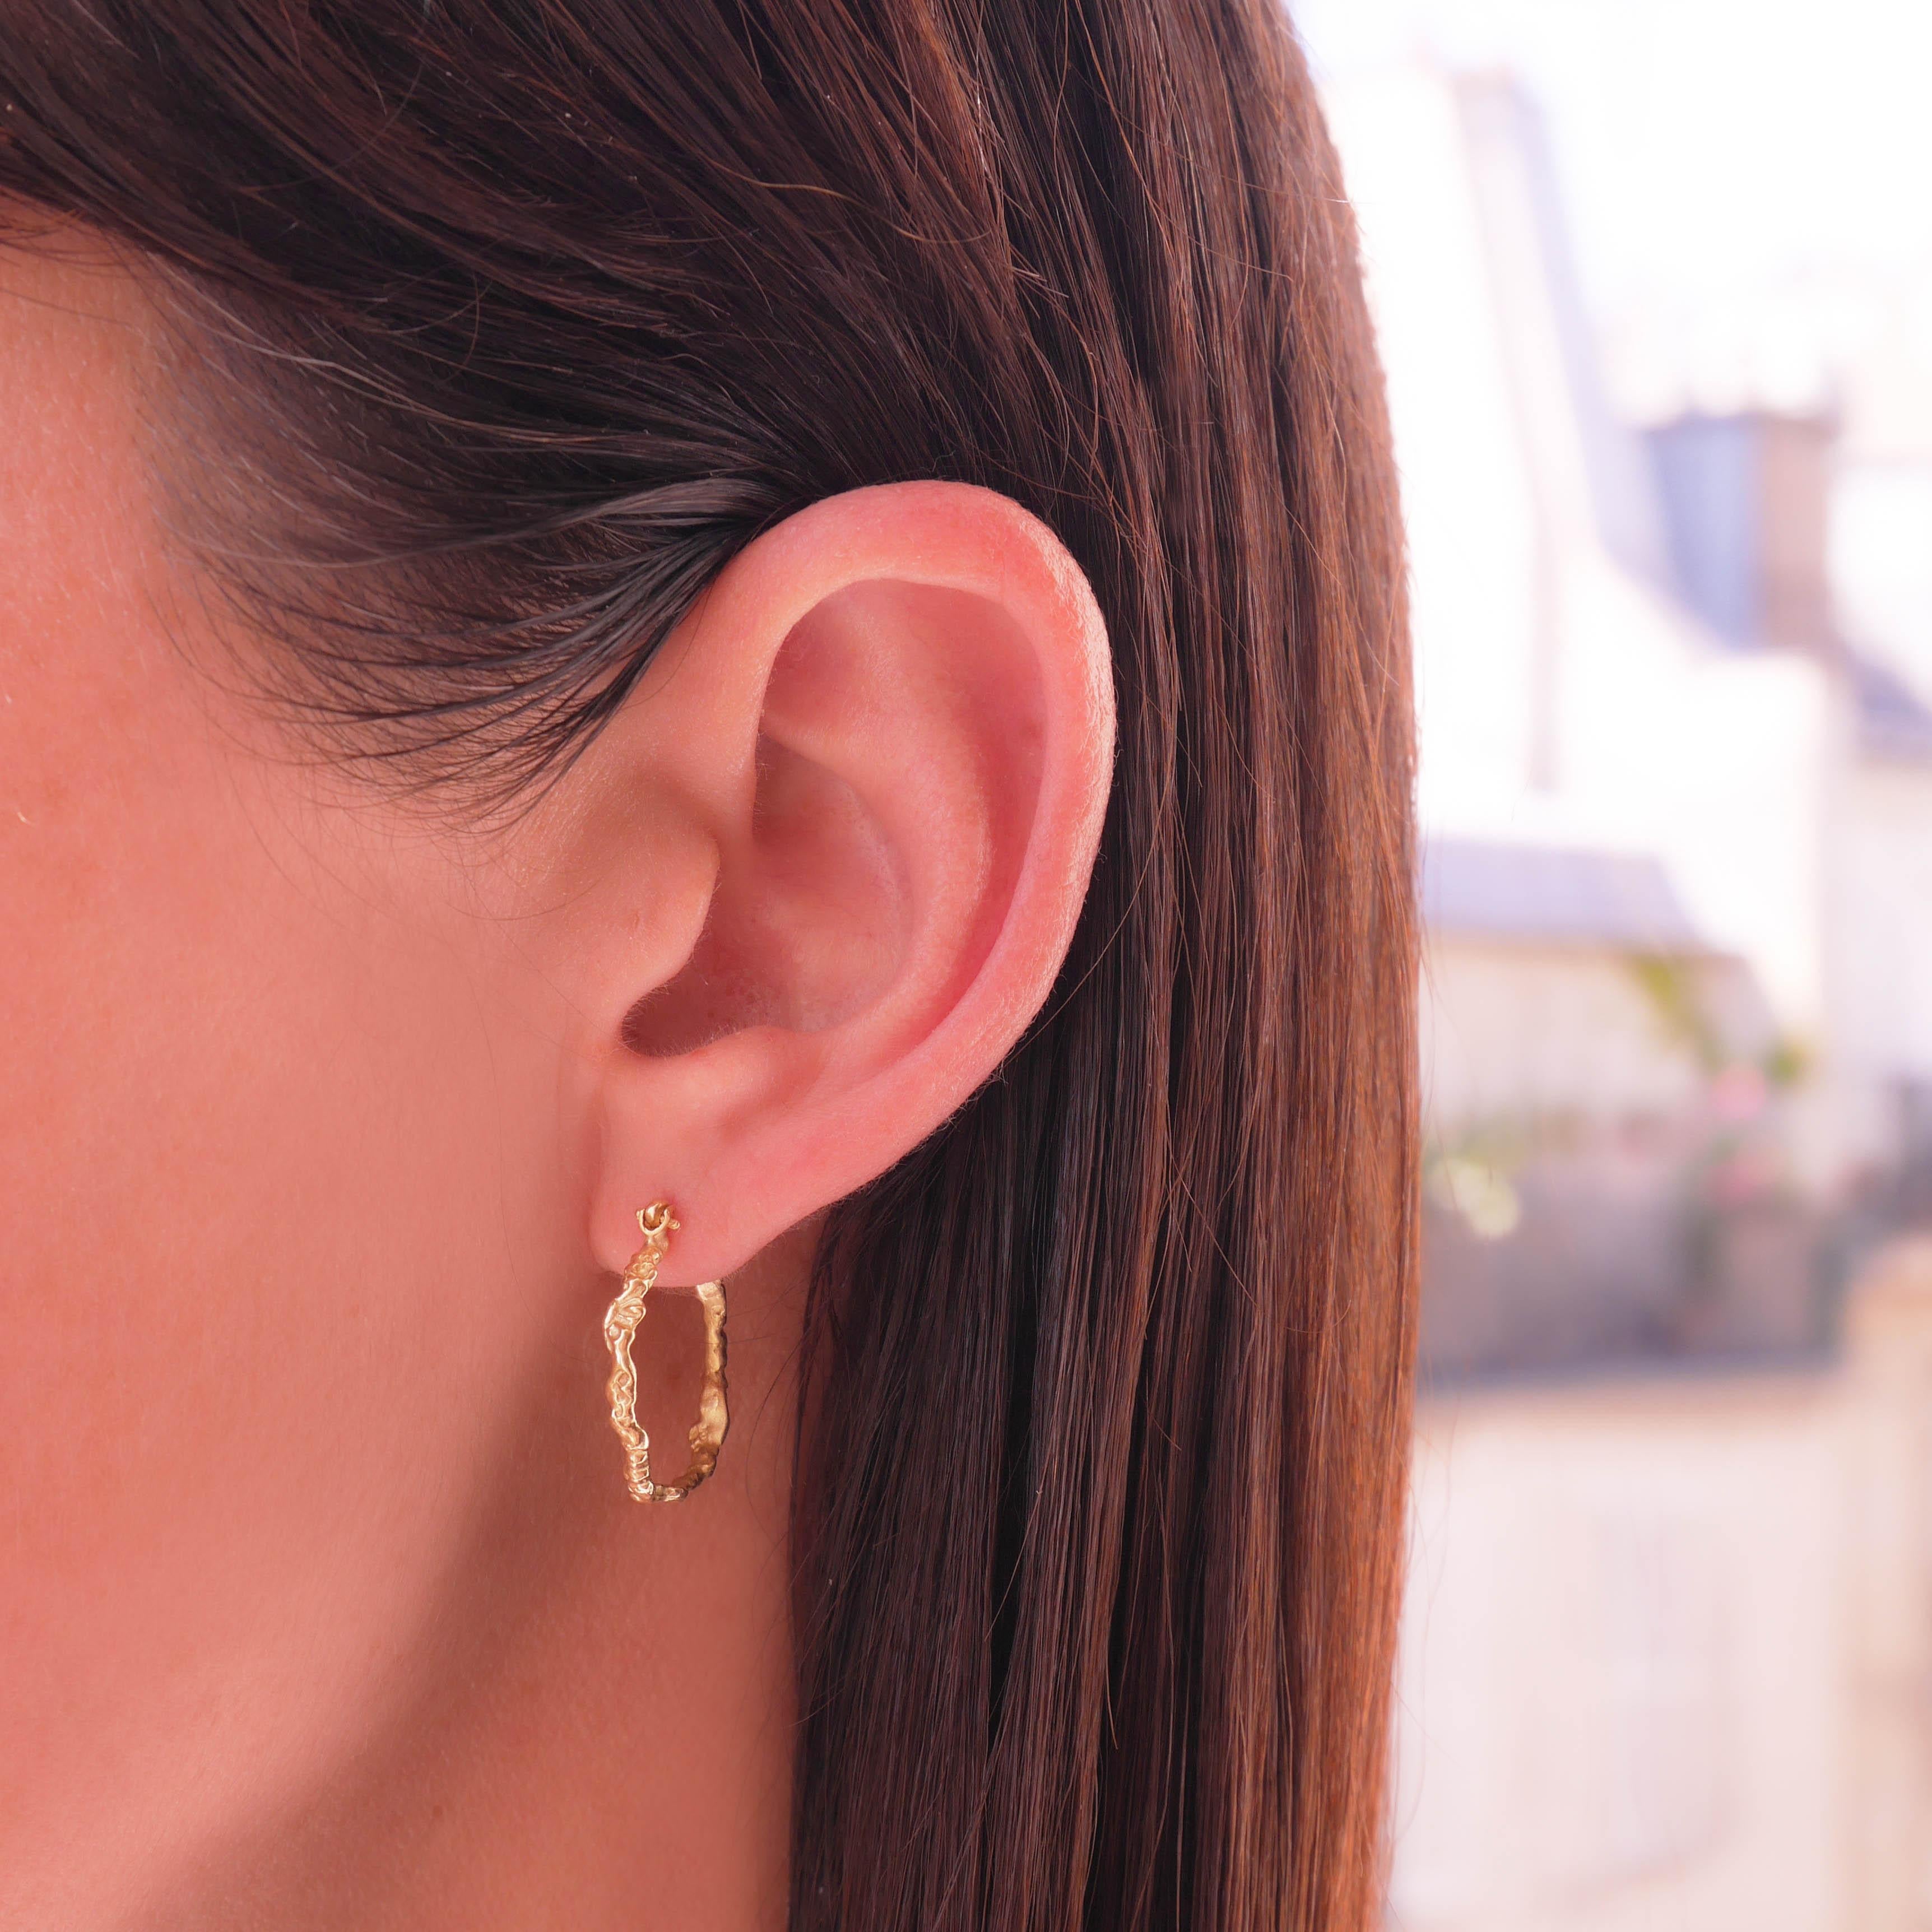 Meticulously crafted earrings made in 18 Karat yellow gold. Its weight is 3.5 grams approximately. 
Post fastening for pierced ears.
The craftsmanship is entirely hand made with great care, in my Parisian atelier, therefore the pieces, the settings,